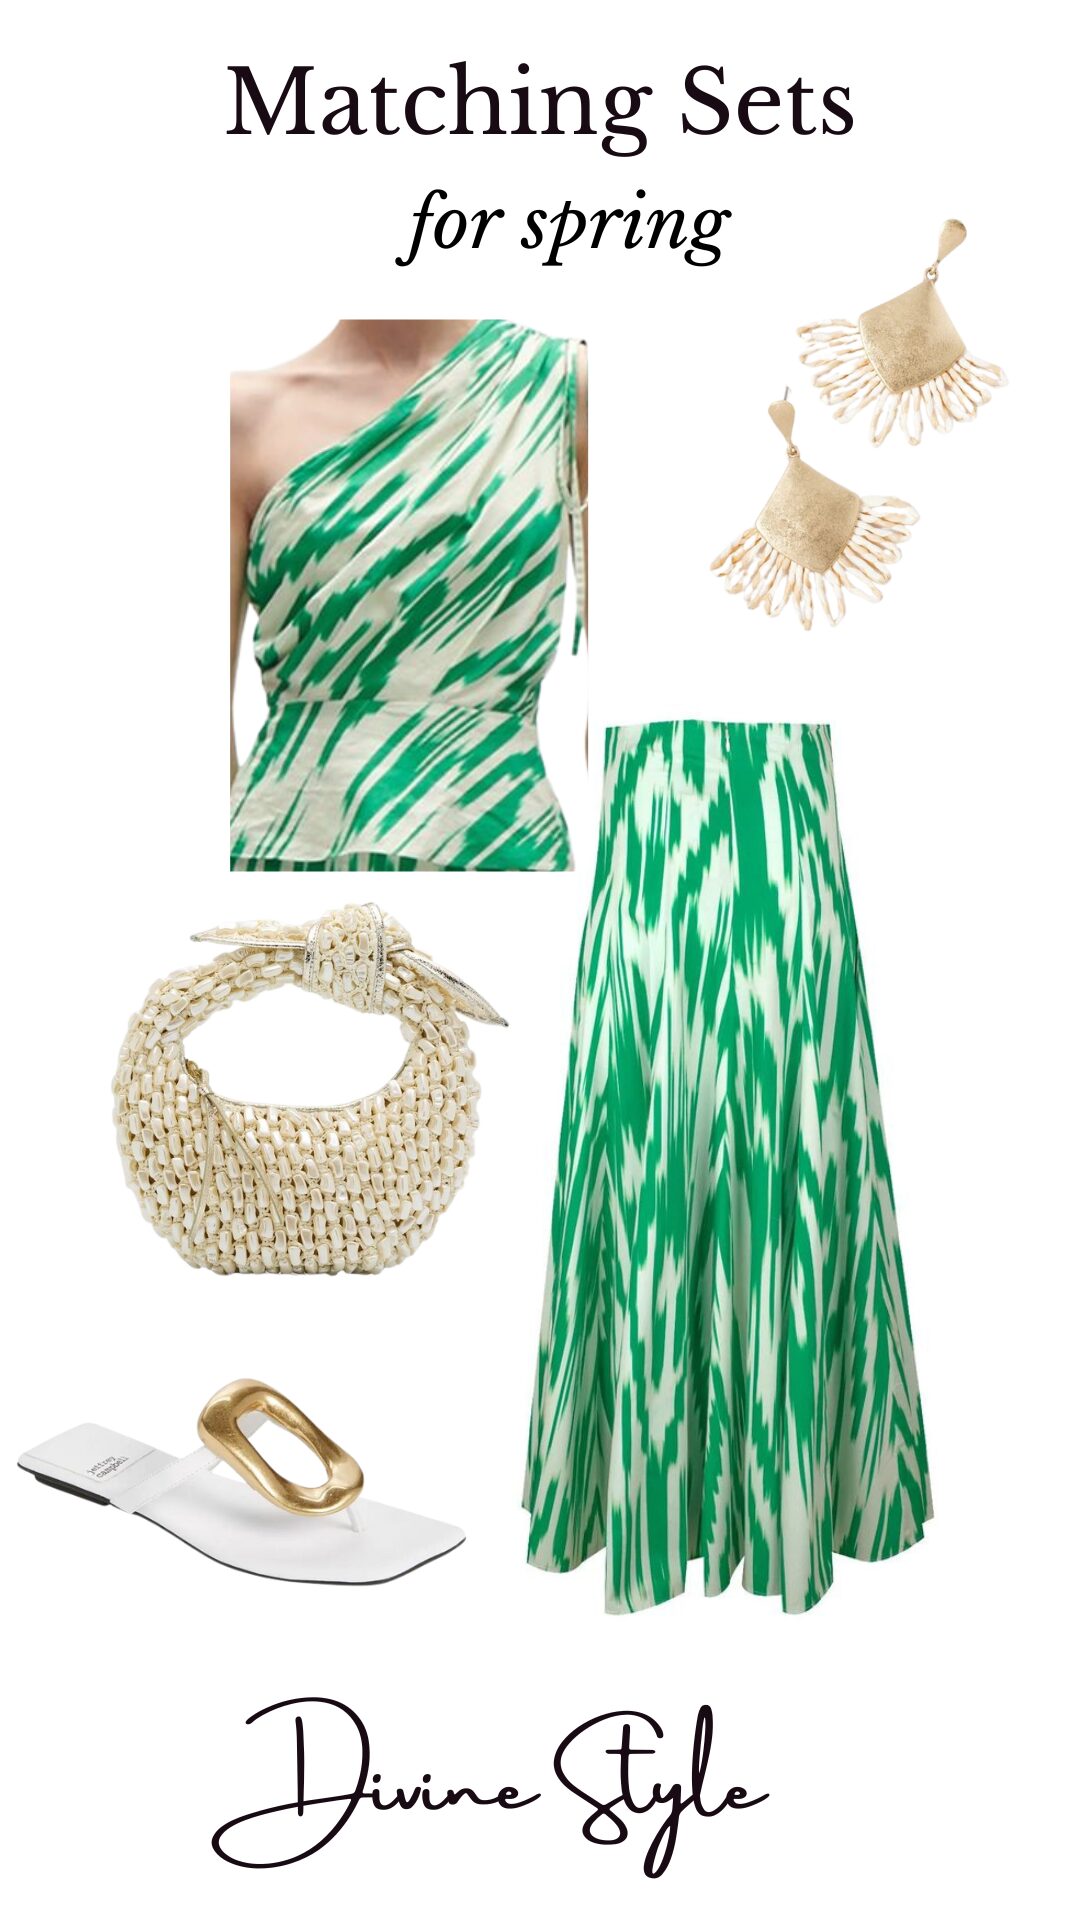 How to Elevate Your Spring Casual Outfits, Matching Sets for women, green and white print skirt and top